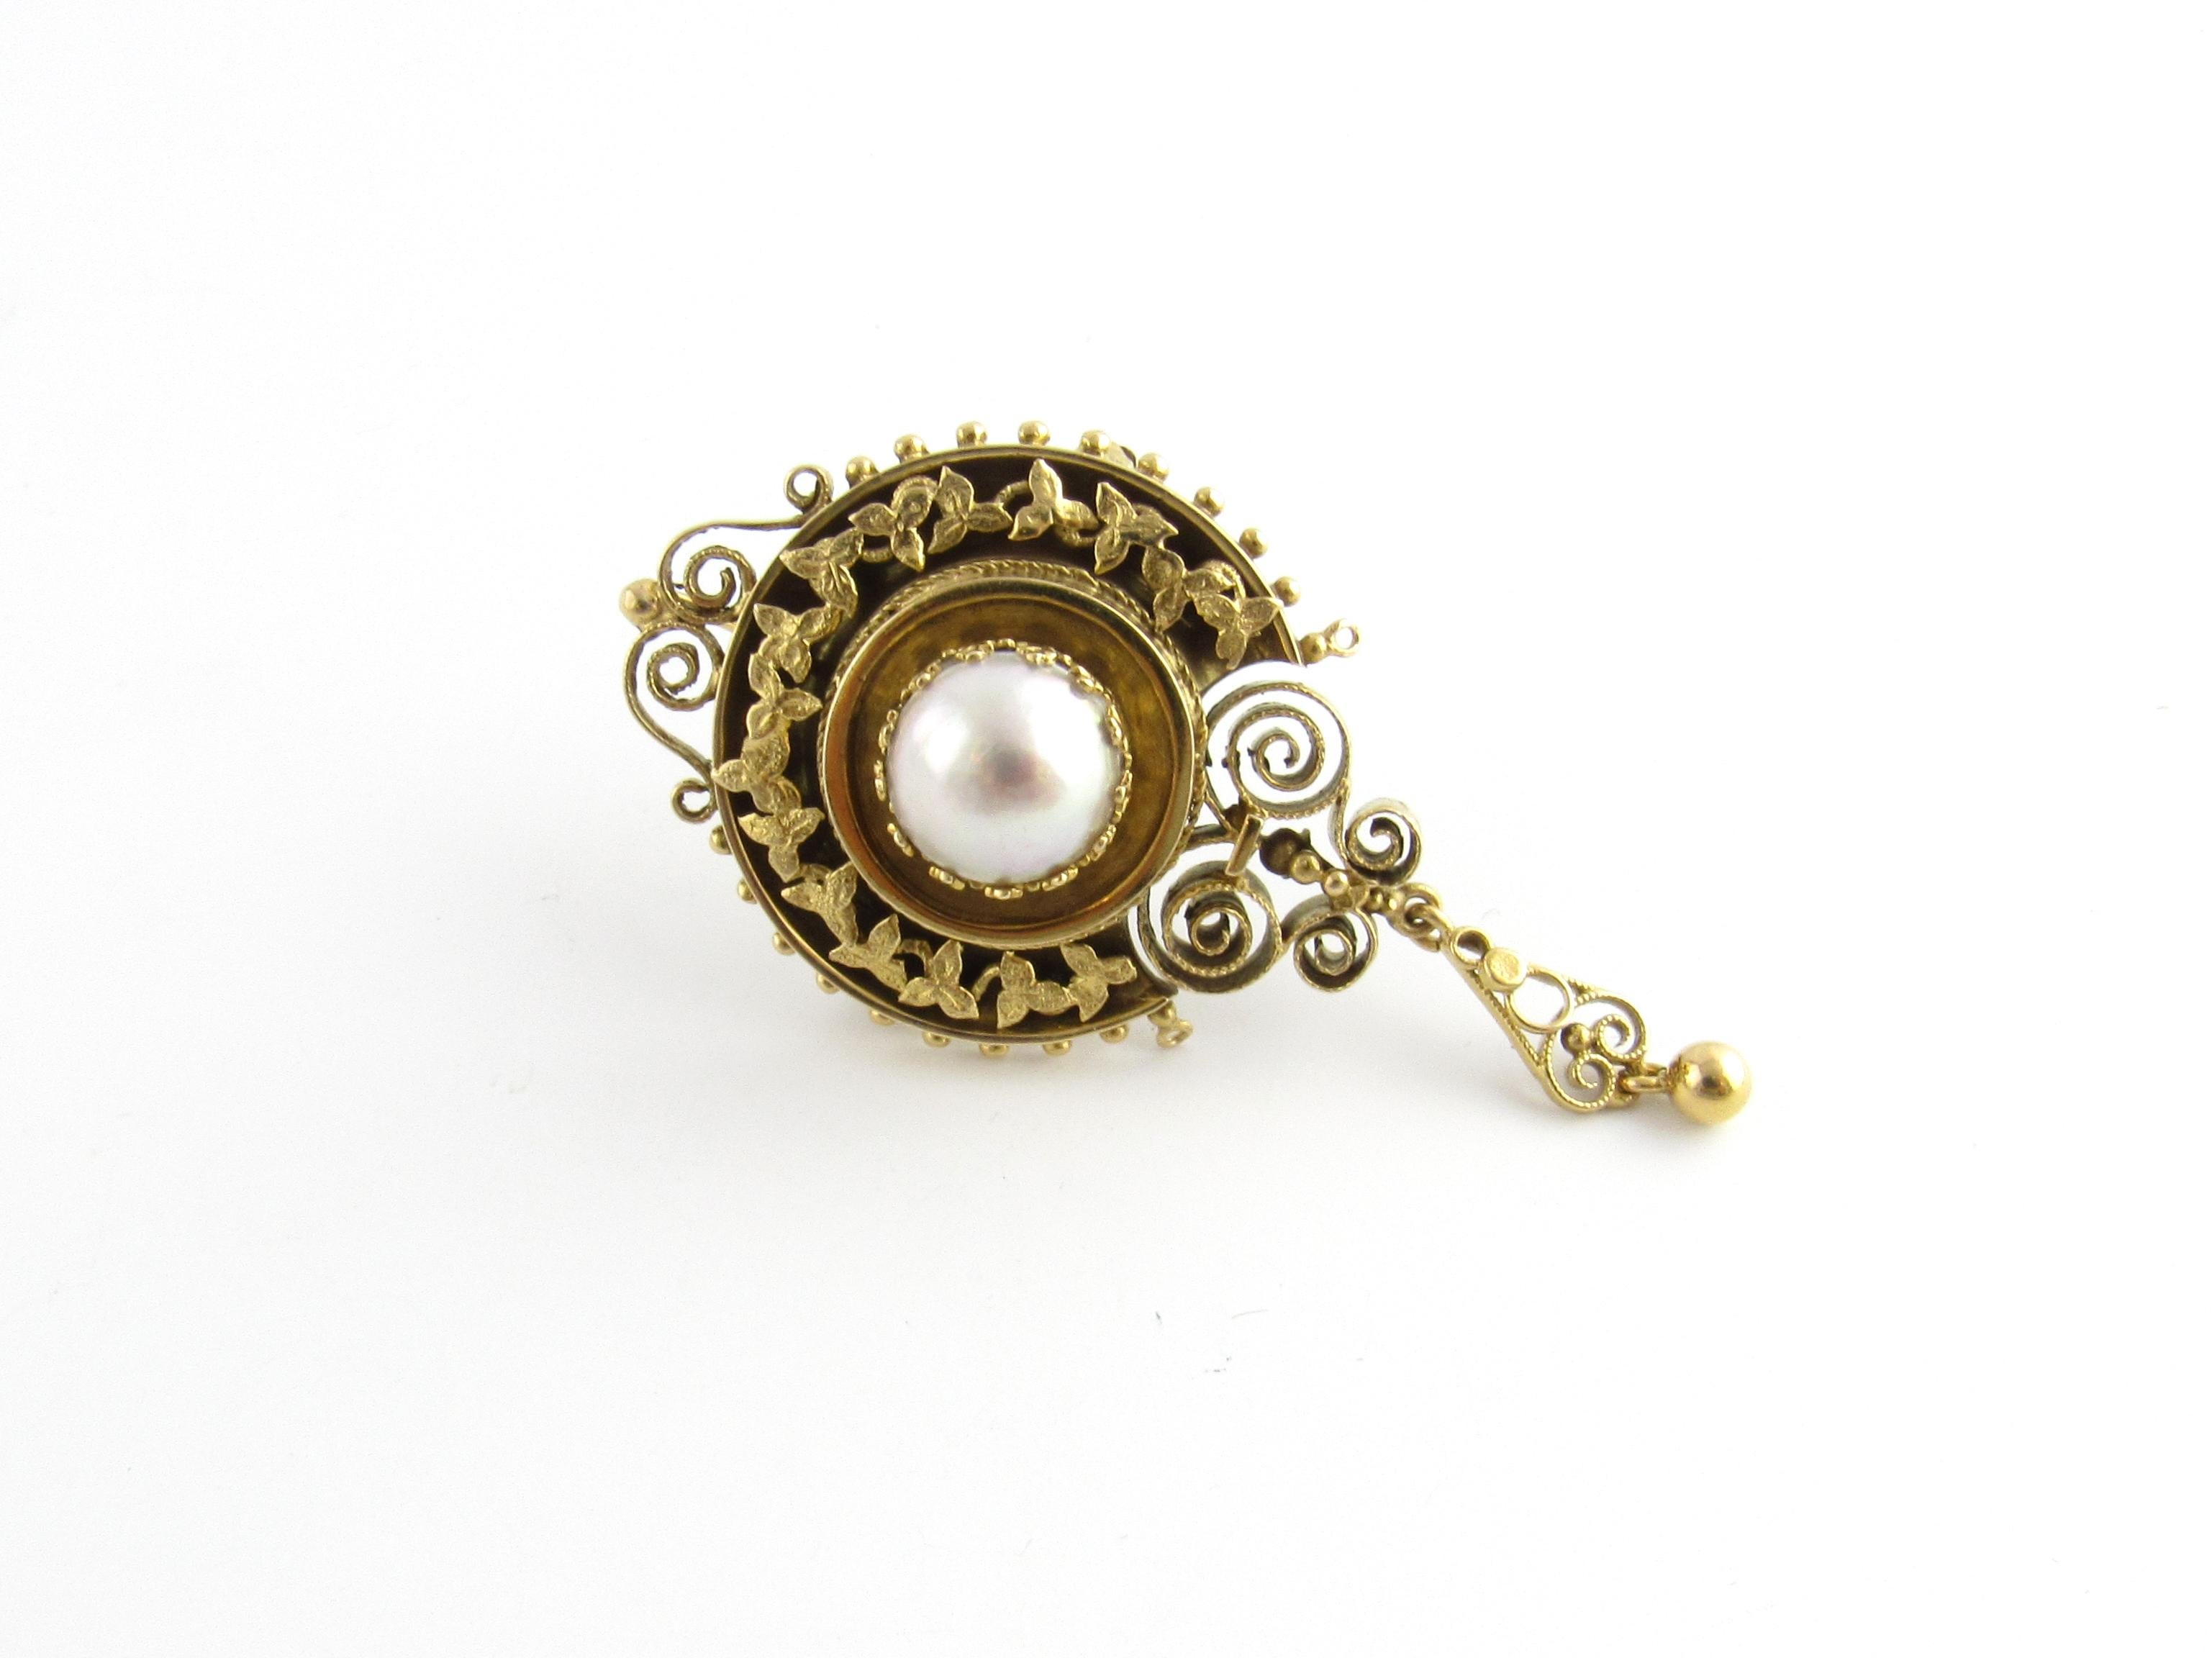 Etruscan Revival 14K Yellow Gold and Mabe Pearl Pin Pendant For Sale 3